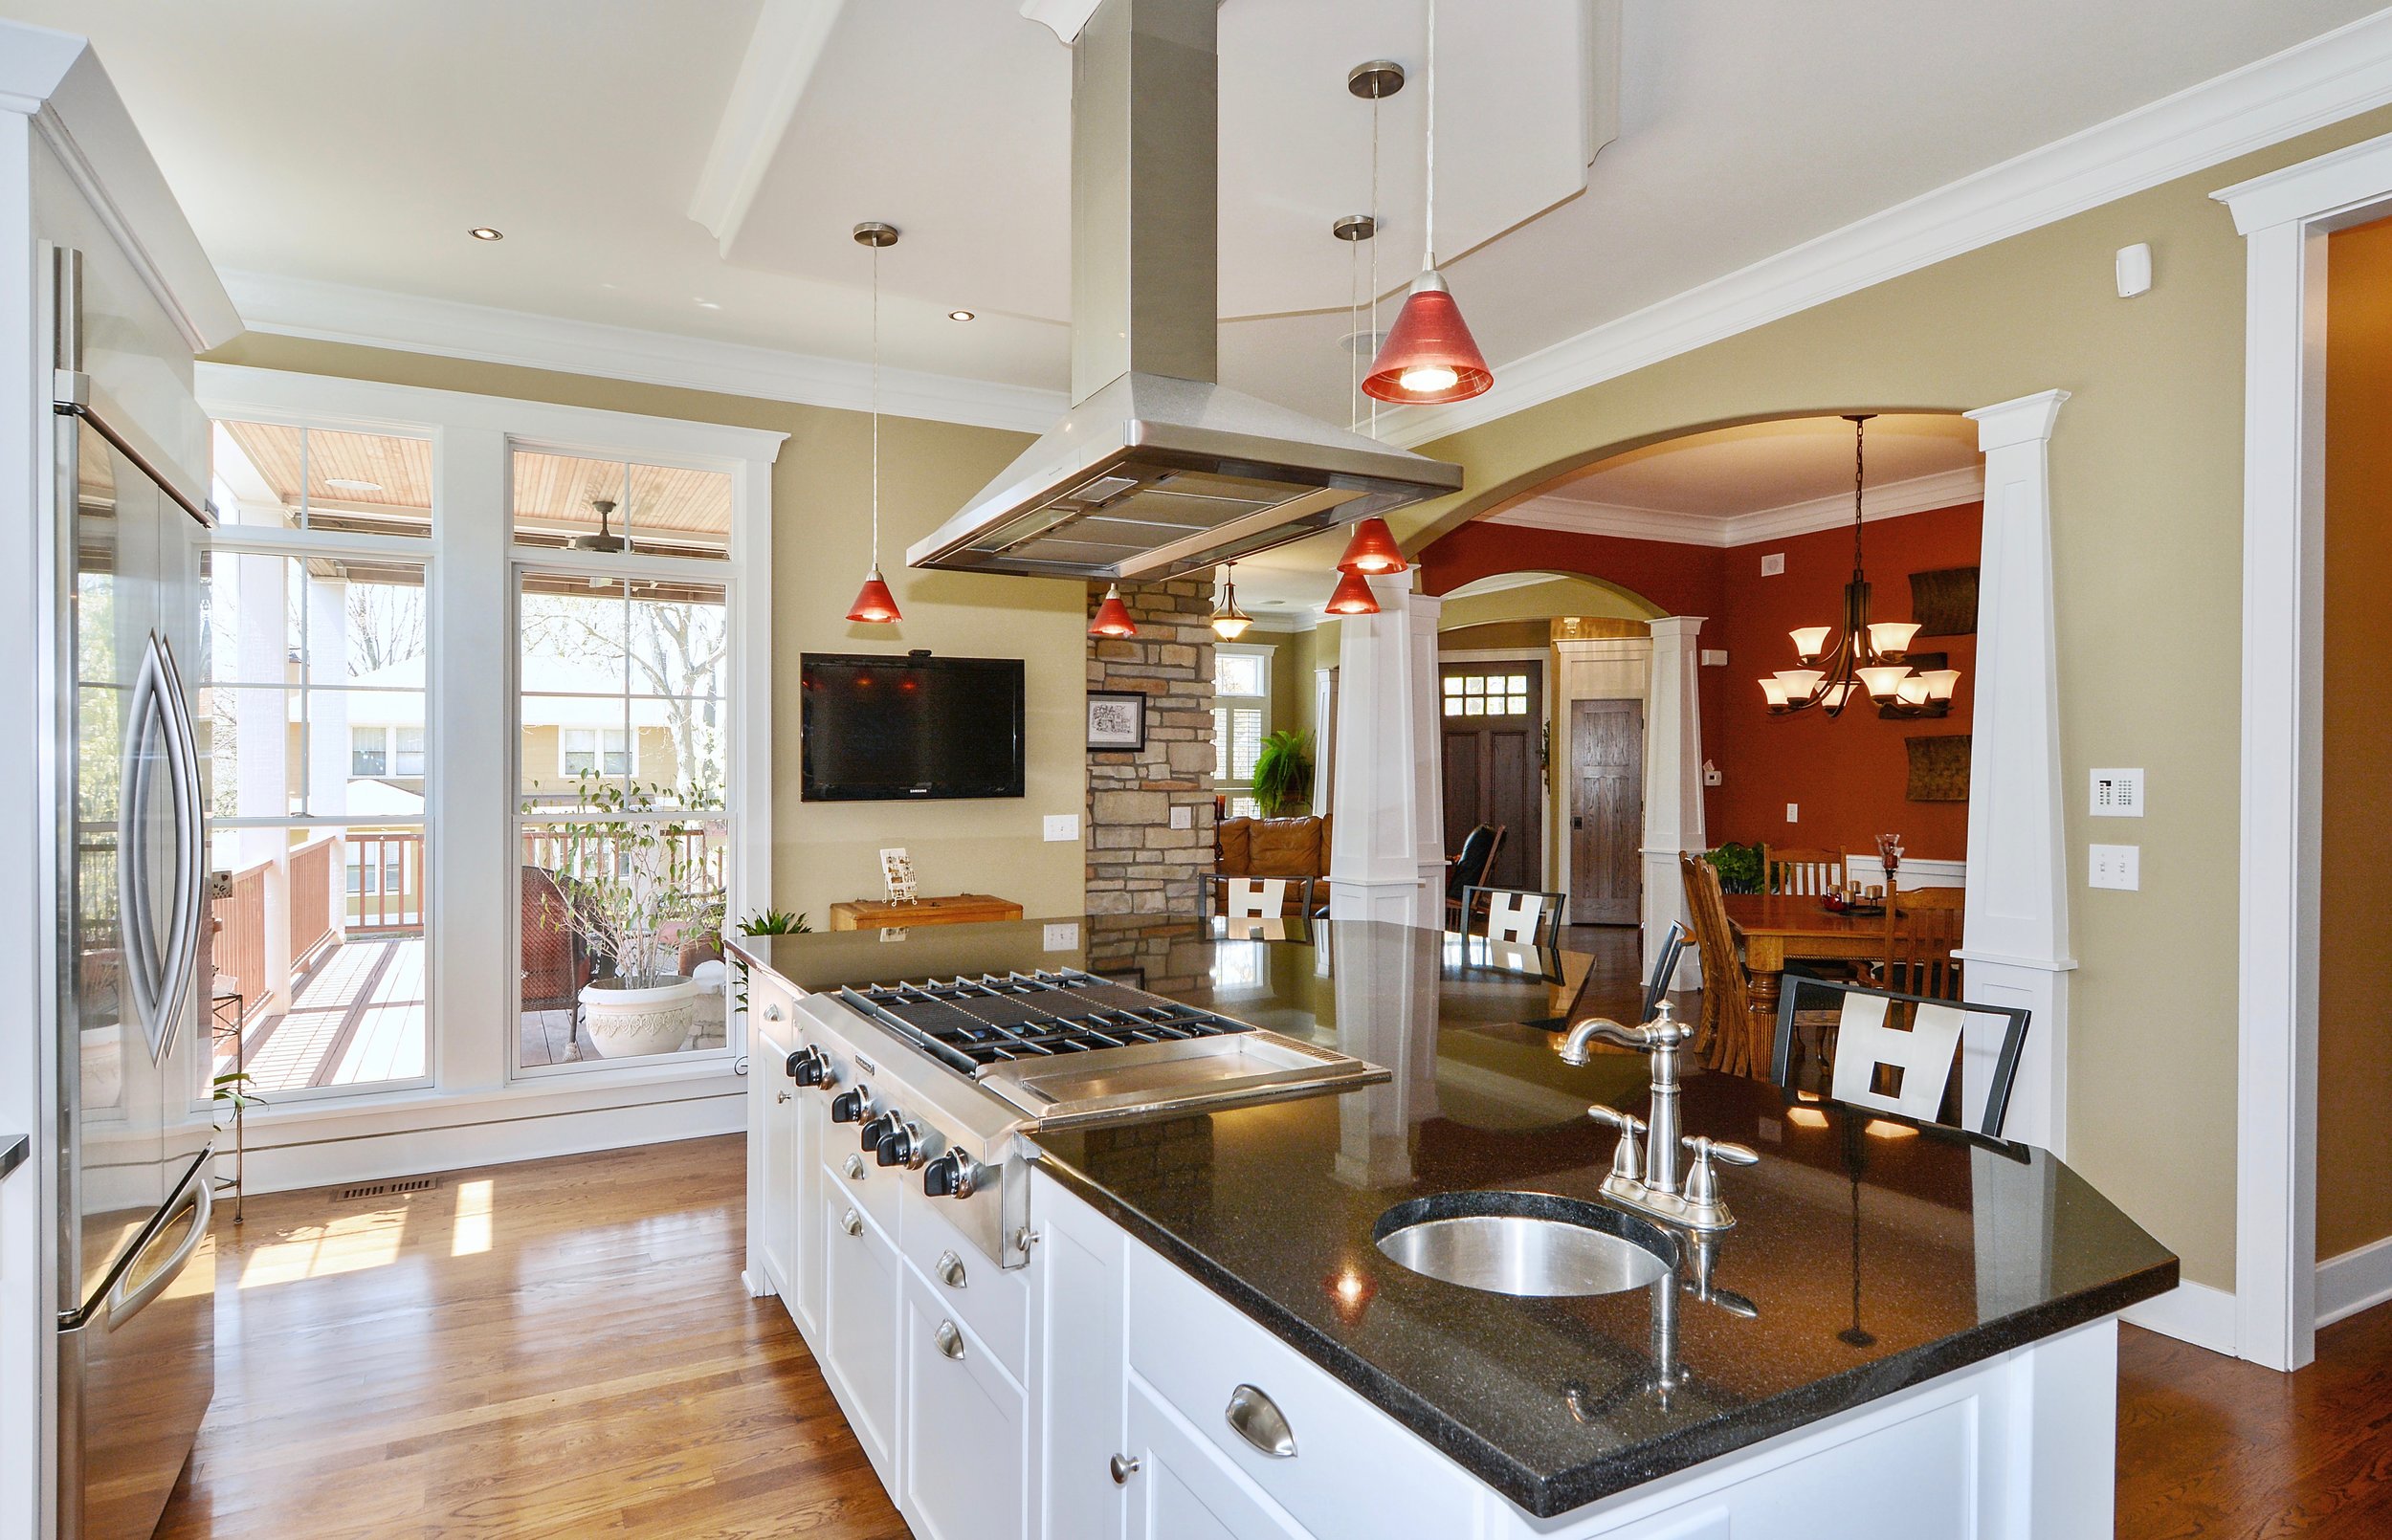 Transitional Custom Kitchen with Transom Windows Above Cabinets